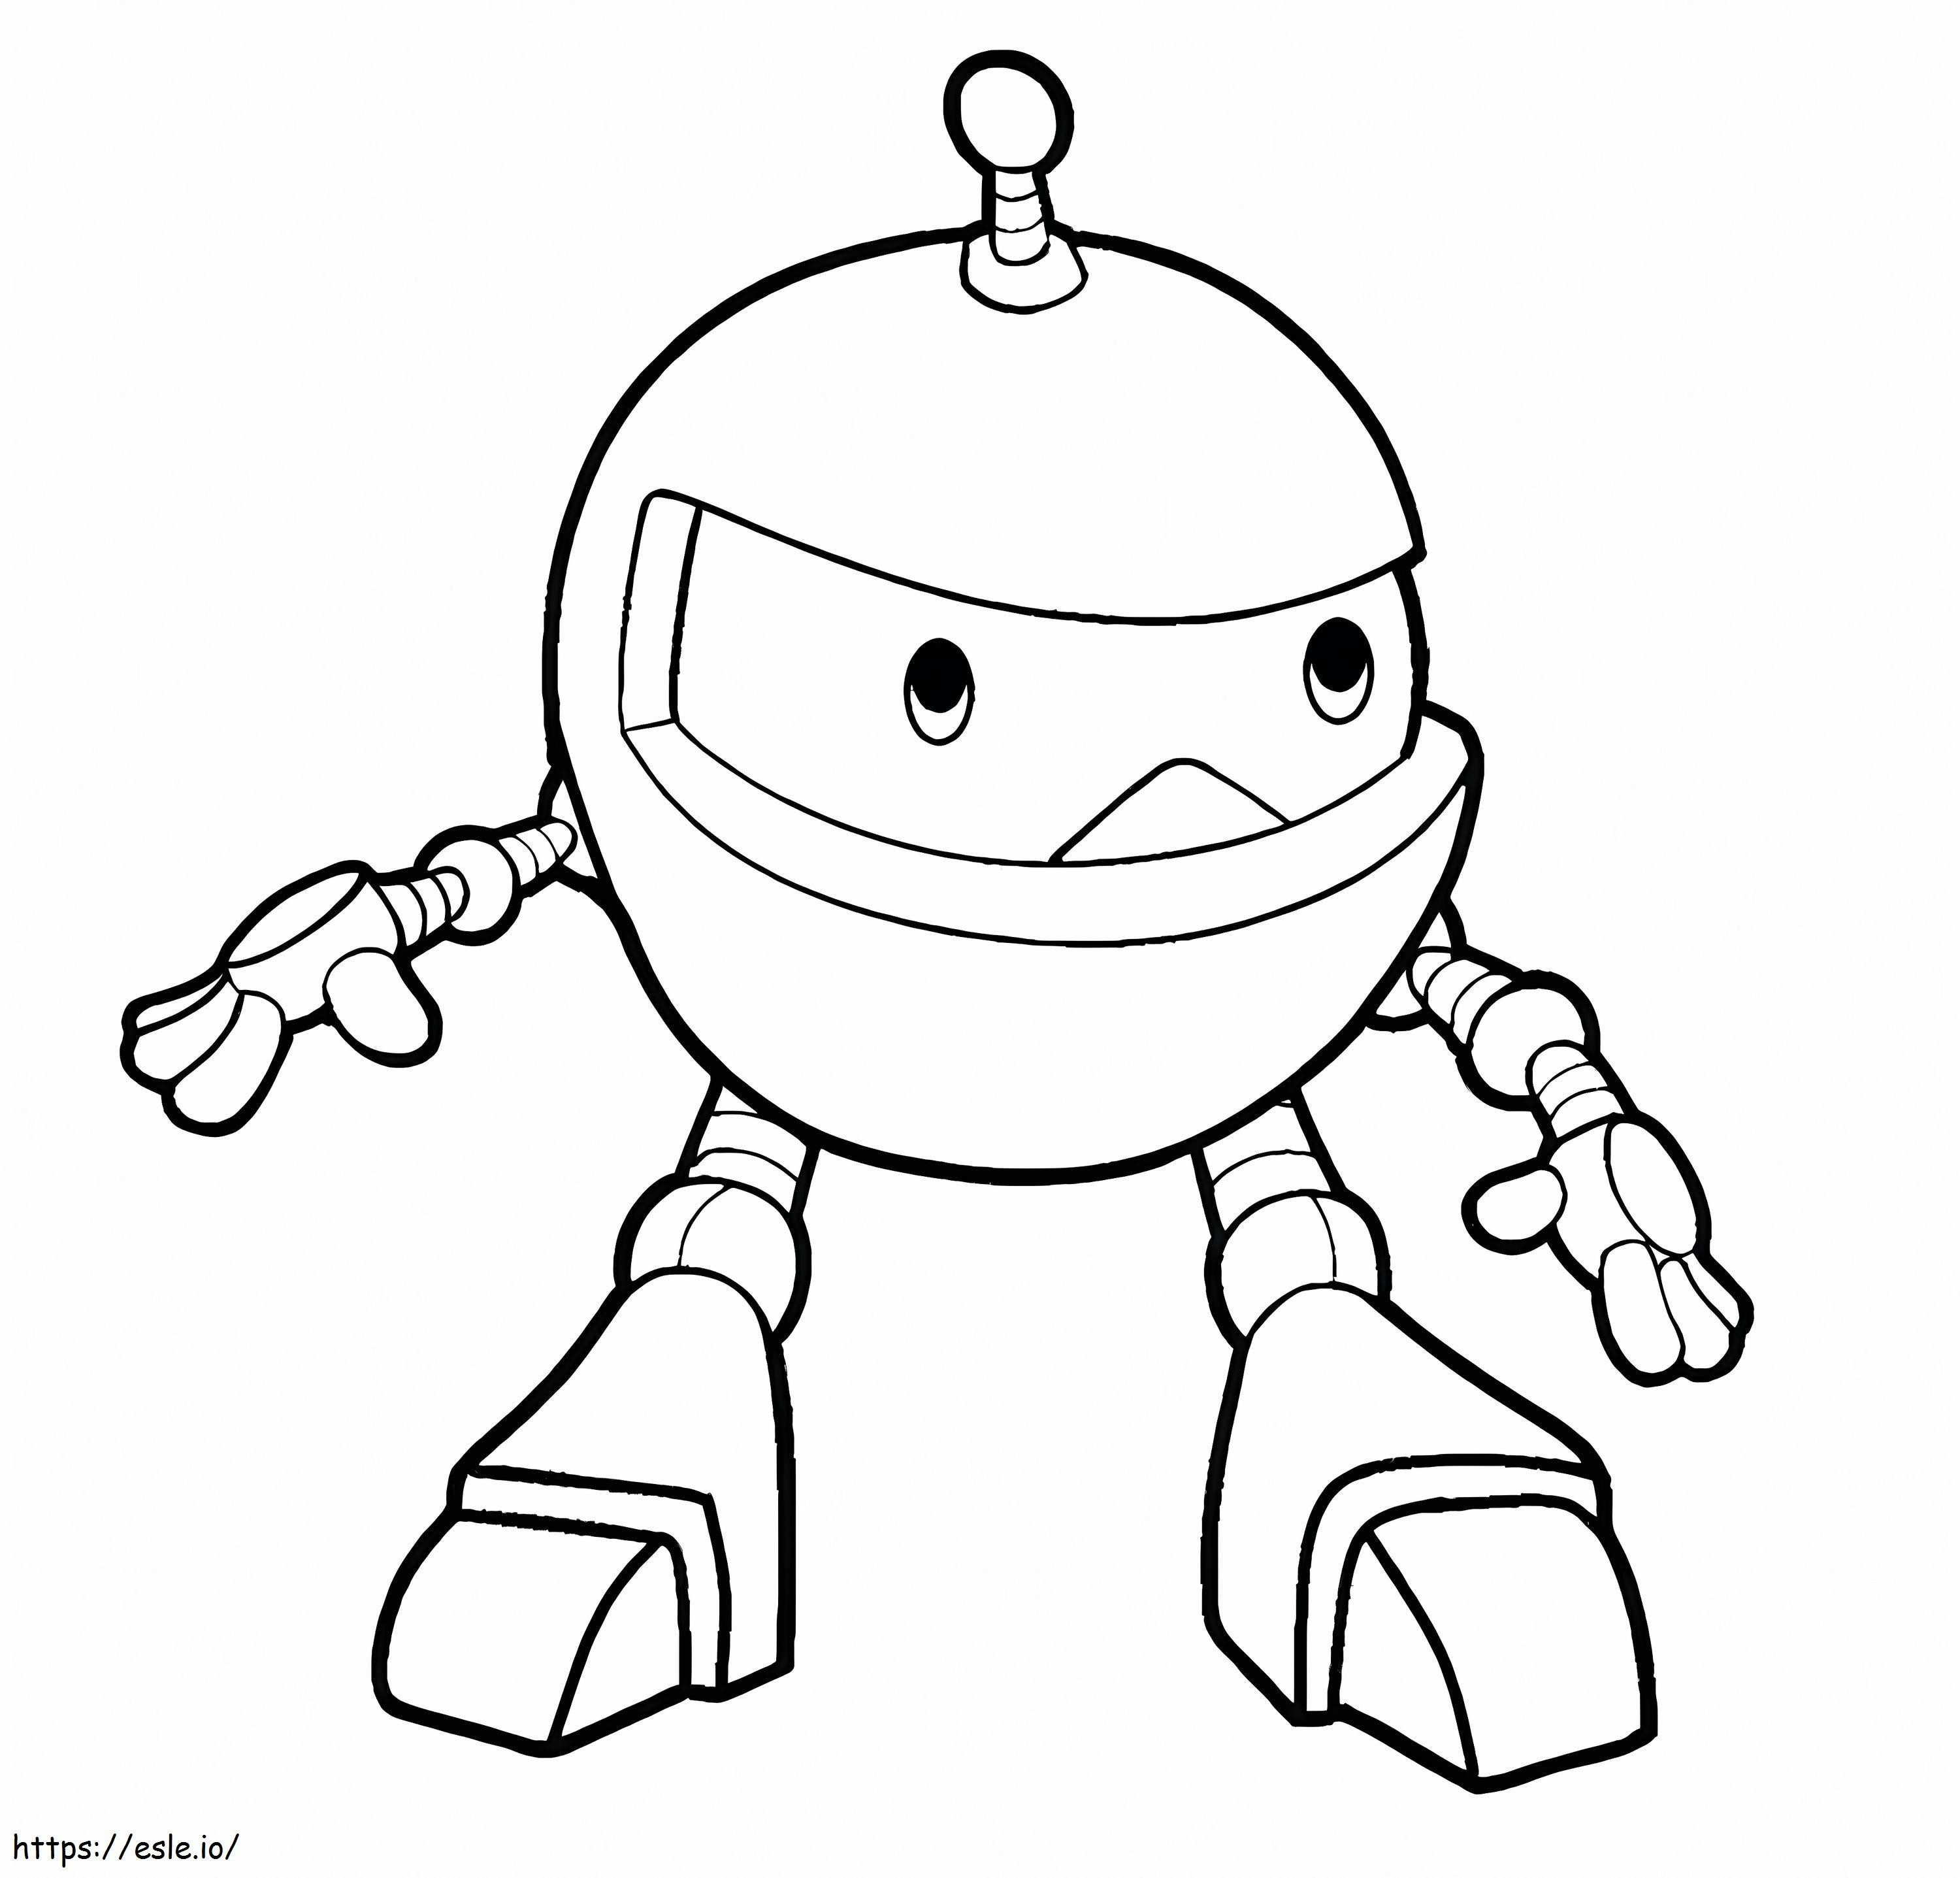 Robot Genial coloring page